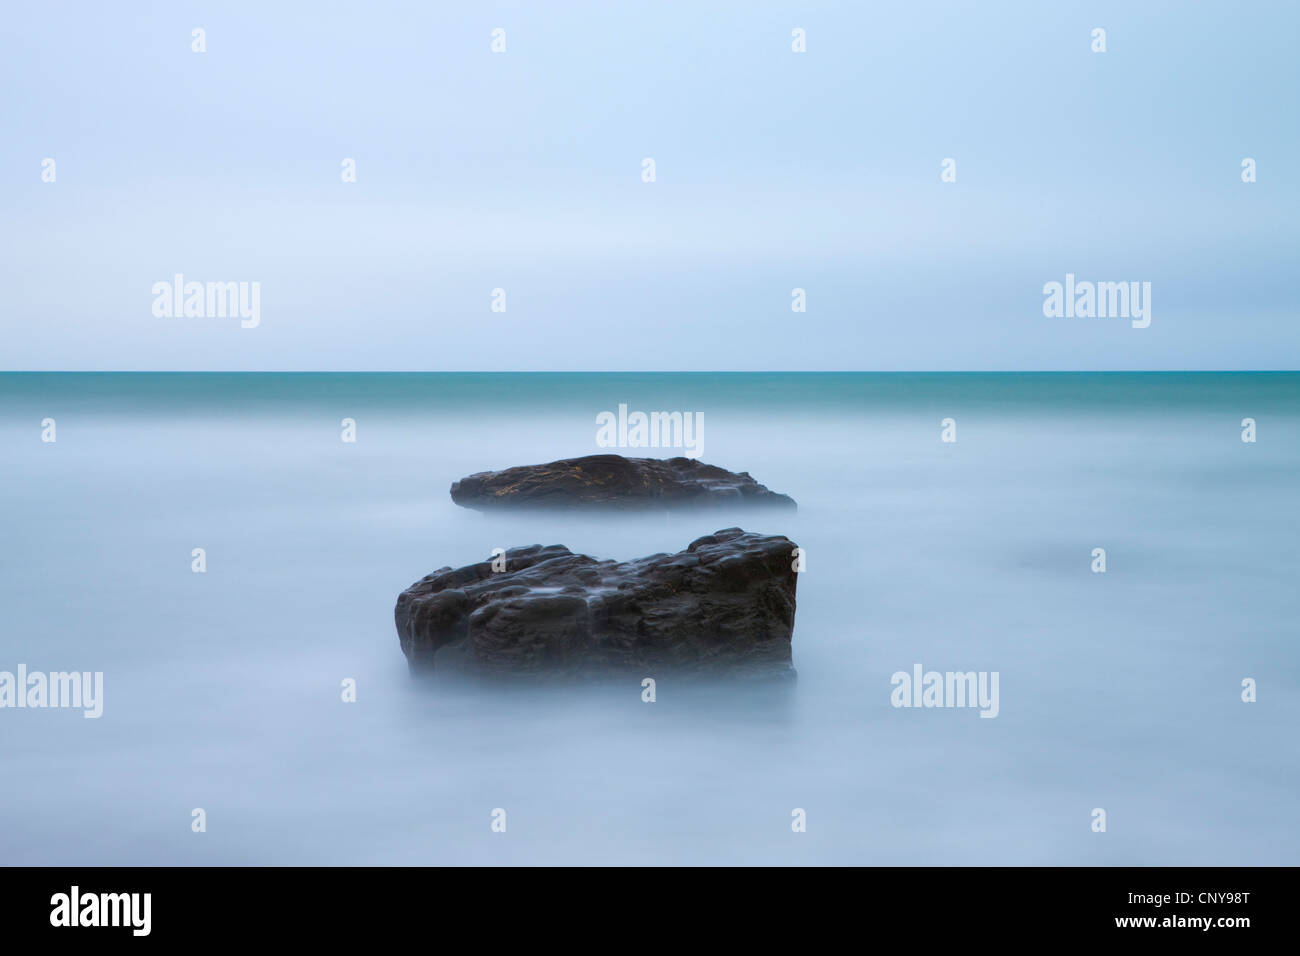 Minimalist seascape at Duckpool in North Cornwall, England. March 2009 Stock Photo